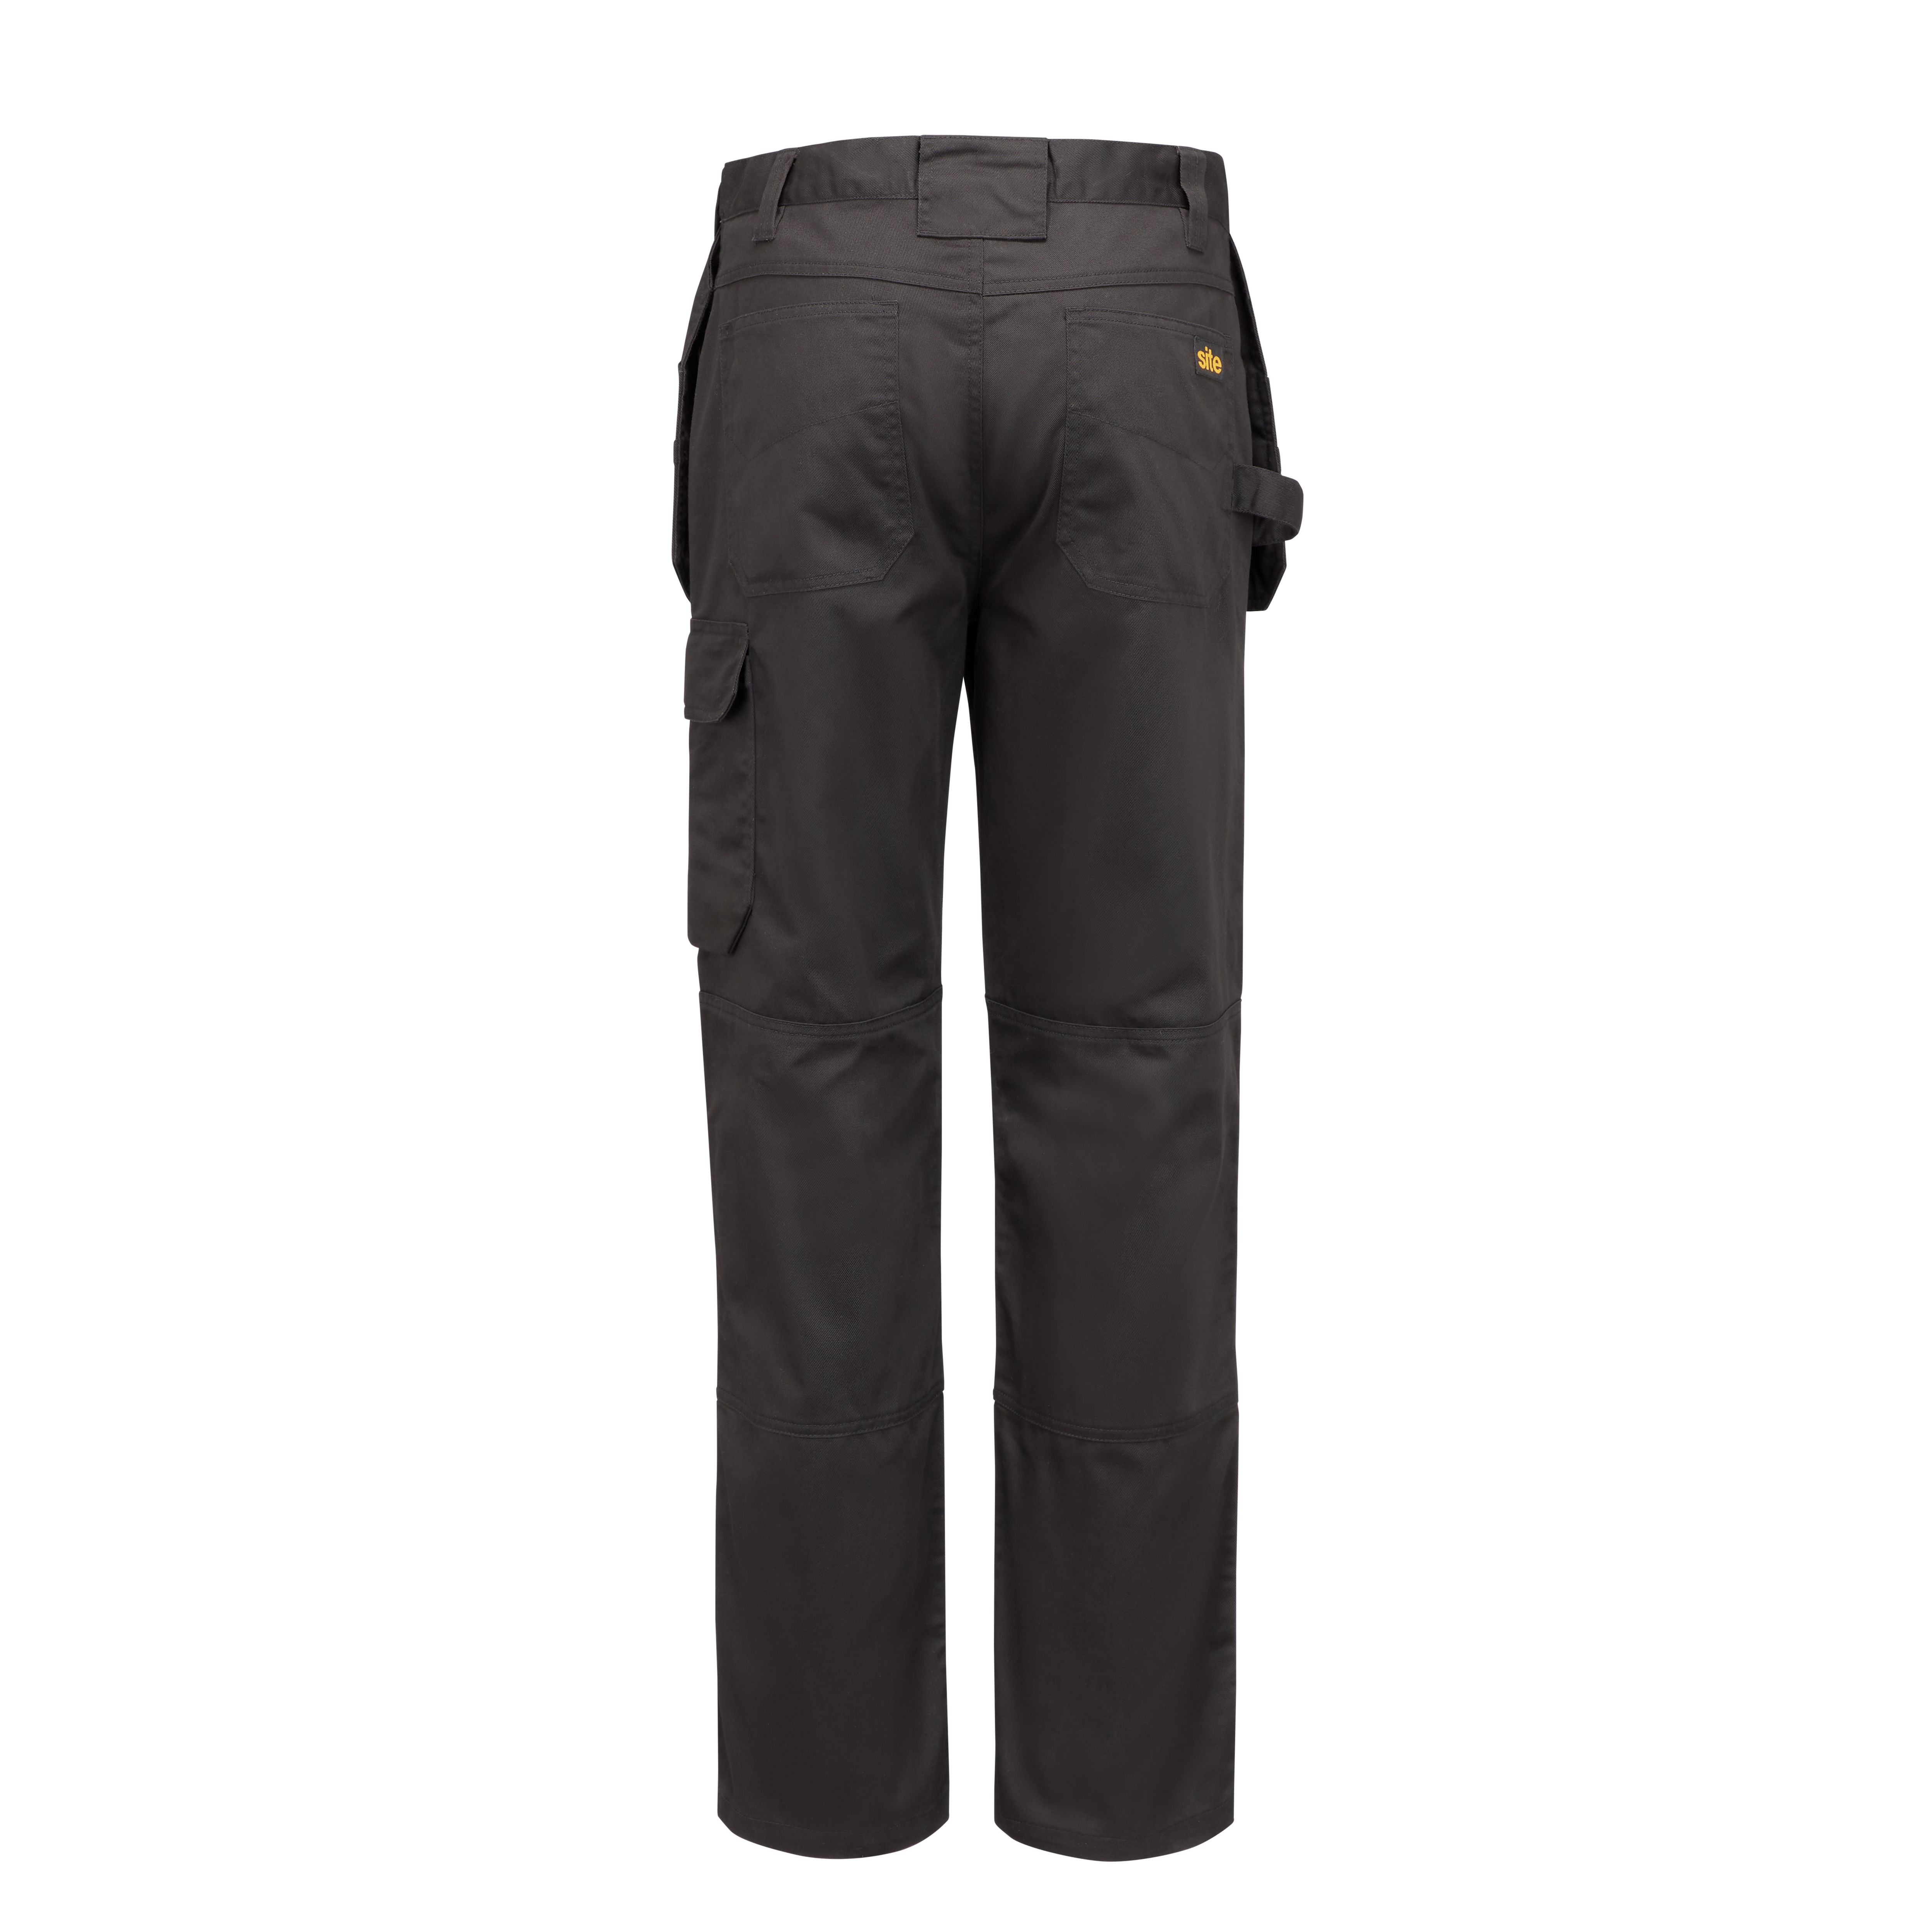 Arco Responsible Men’s Black Cargo Trousers with Kneepad Pockets